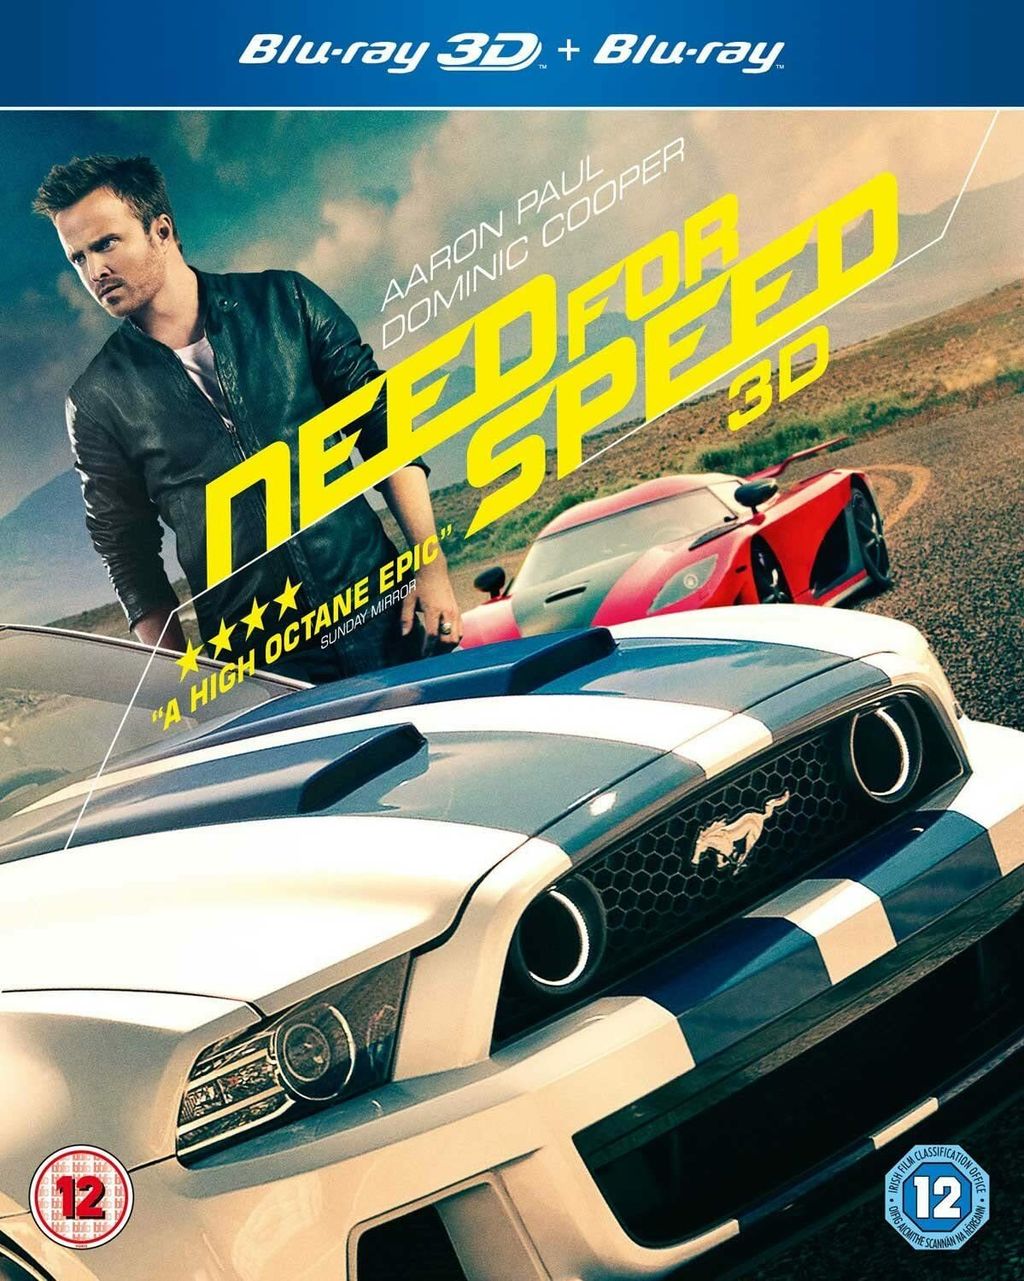 NEED FOR SPEED 3D [Blu-ray] 2-discs.jpg